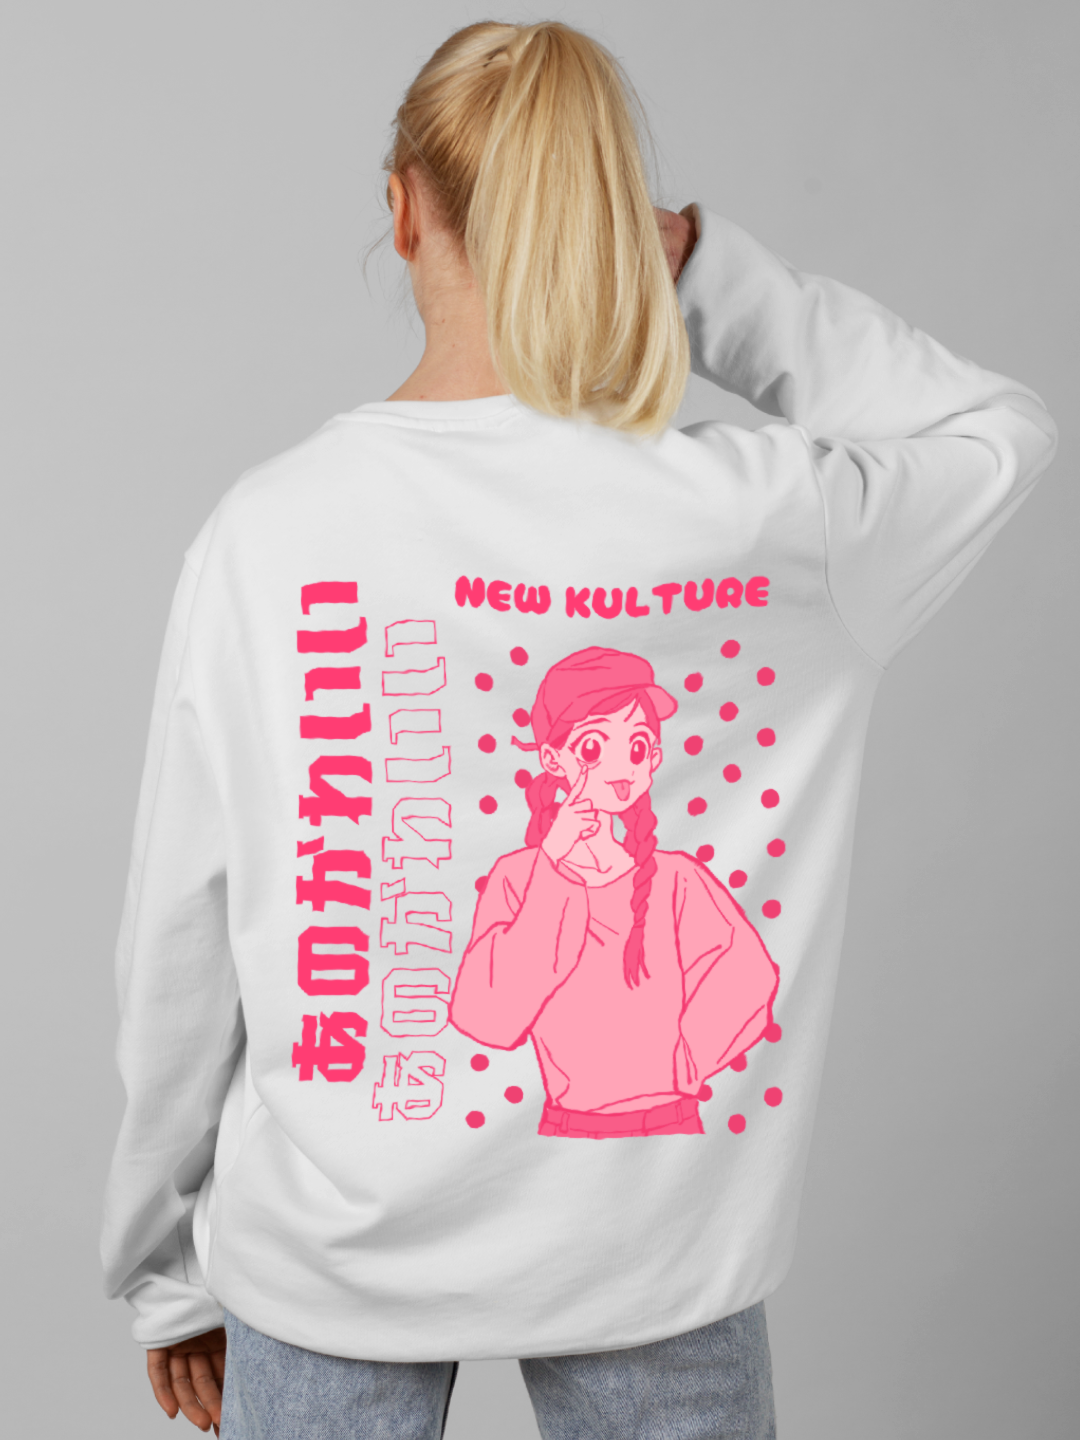 Women's Oversized Sweatshirt with Pink Anime Girl Design – White Color Option